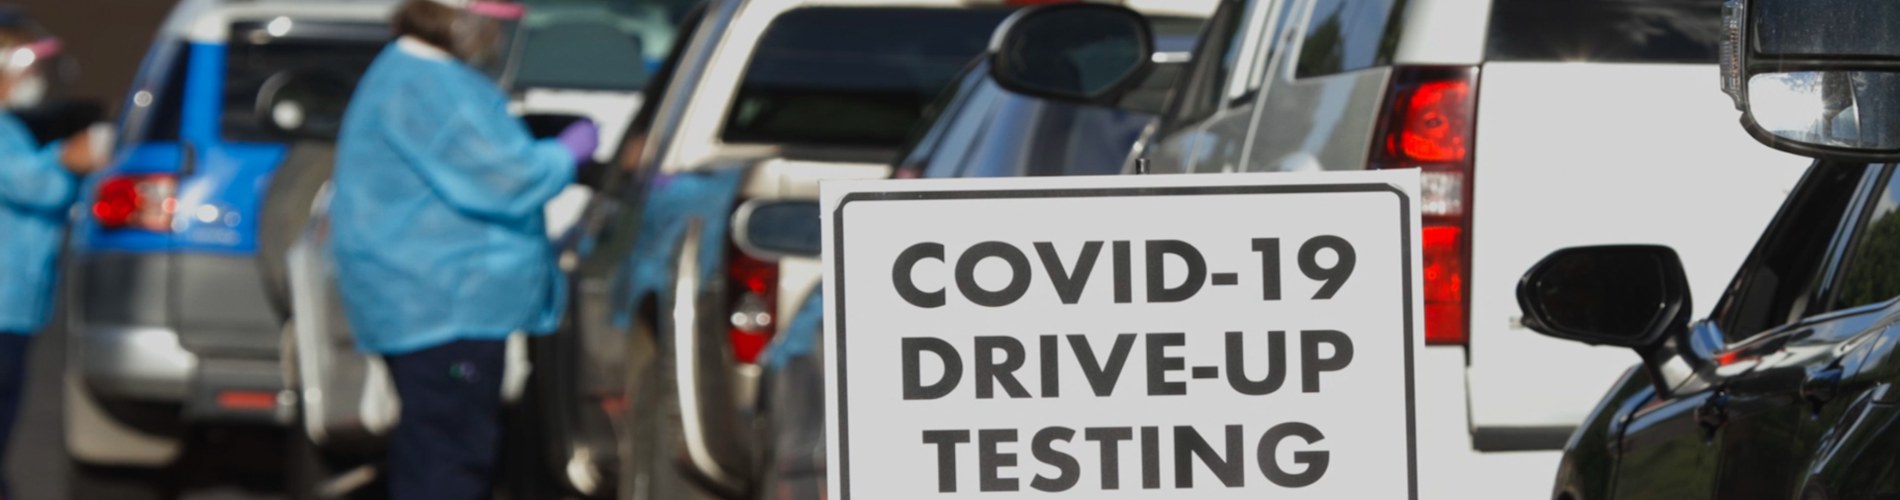 performing covid tests from the car